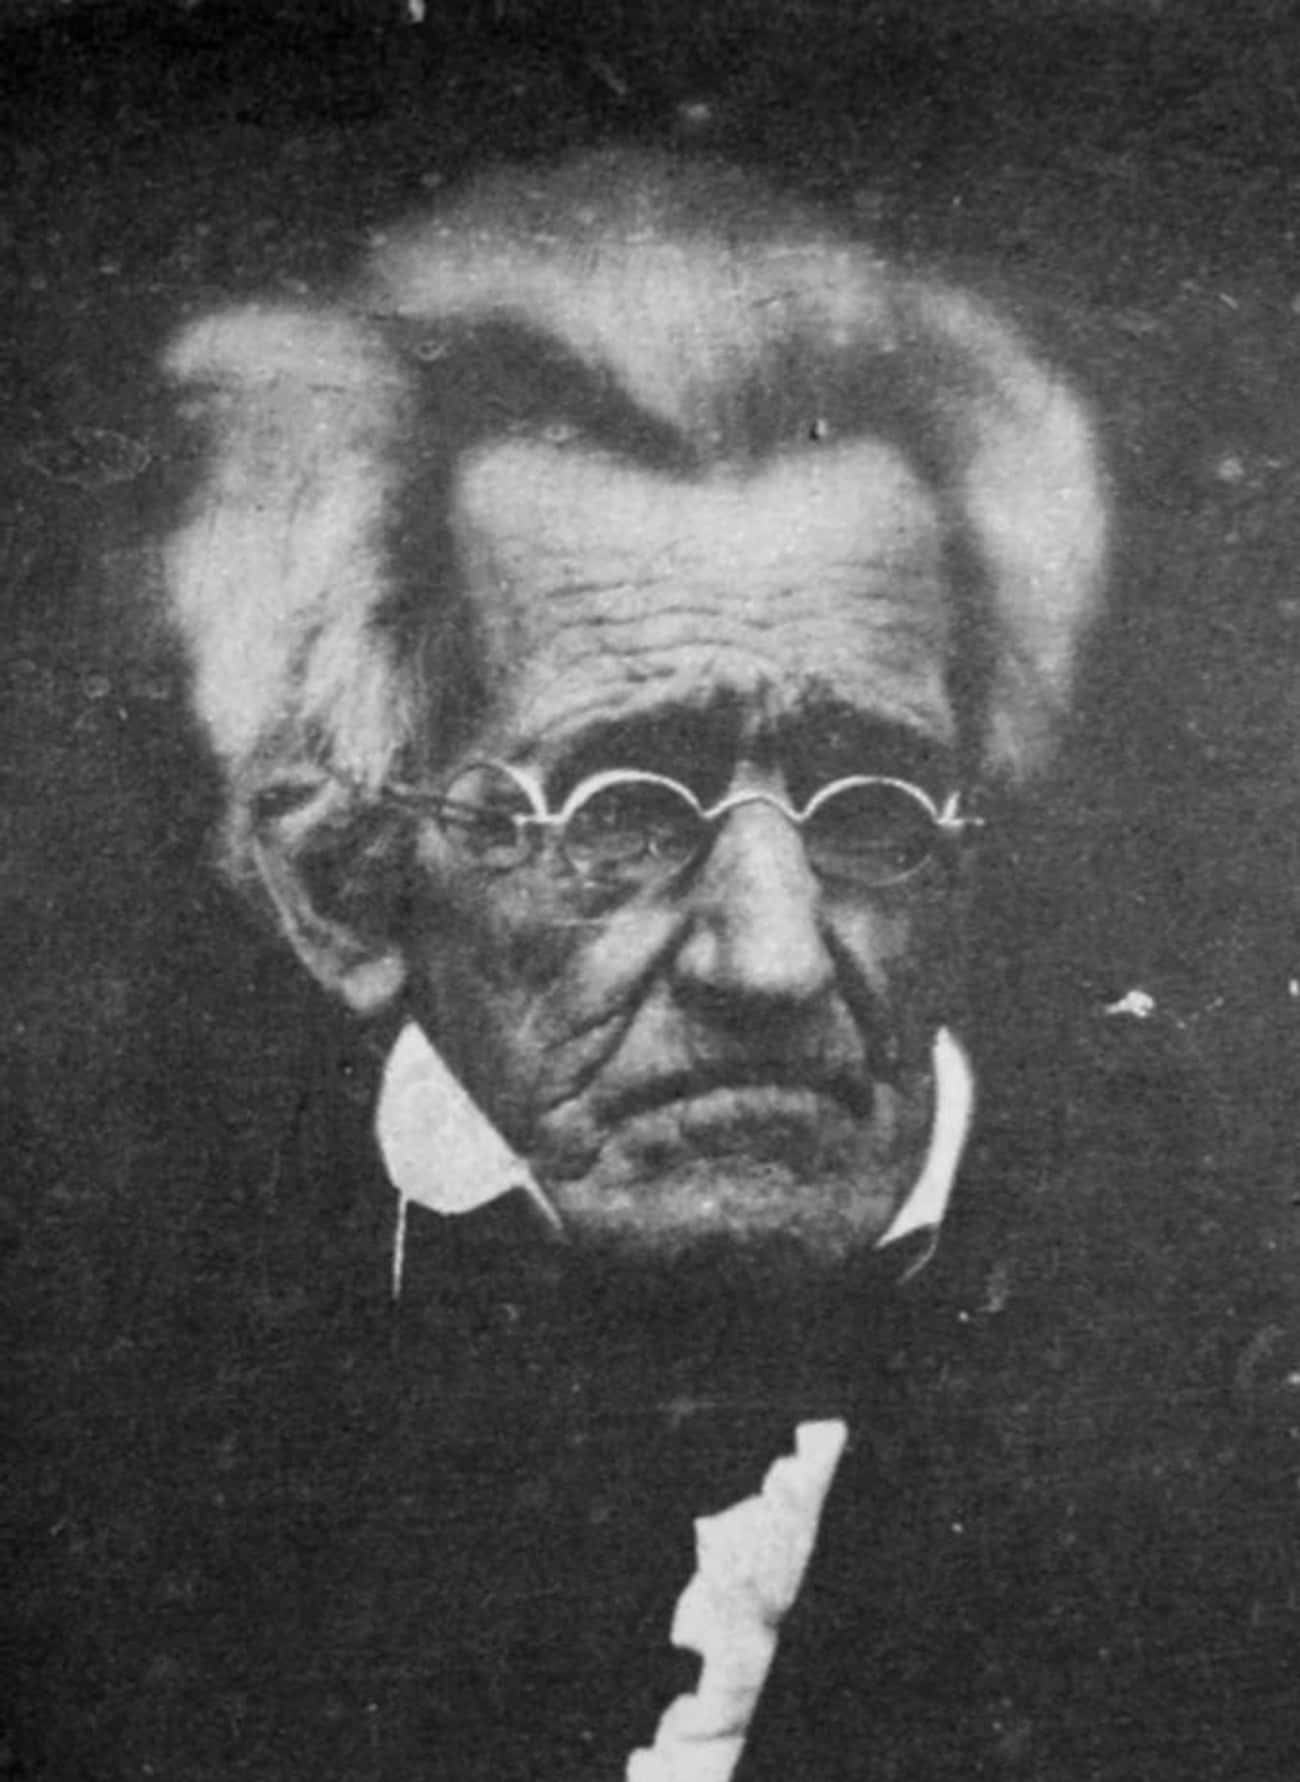 Andrew Jackson, 1844 Or 1845 (Died Of Chronic Dropsy And Heart Failure On June 8, 1845)